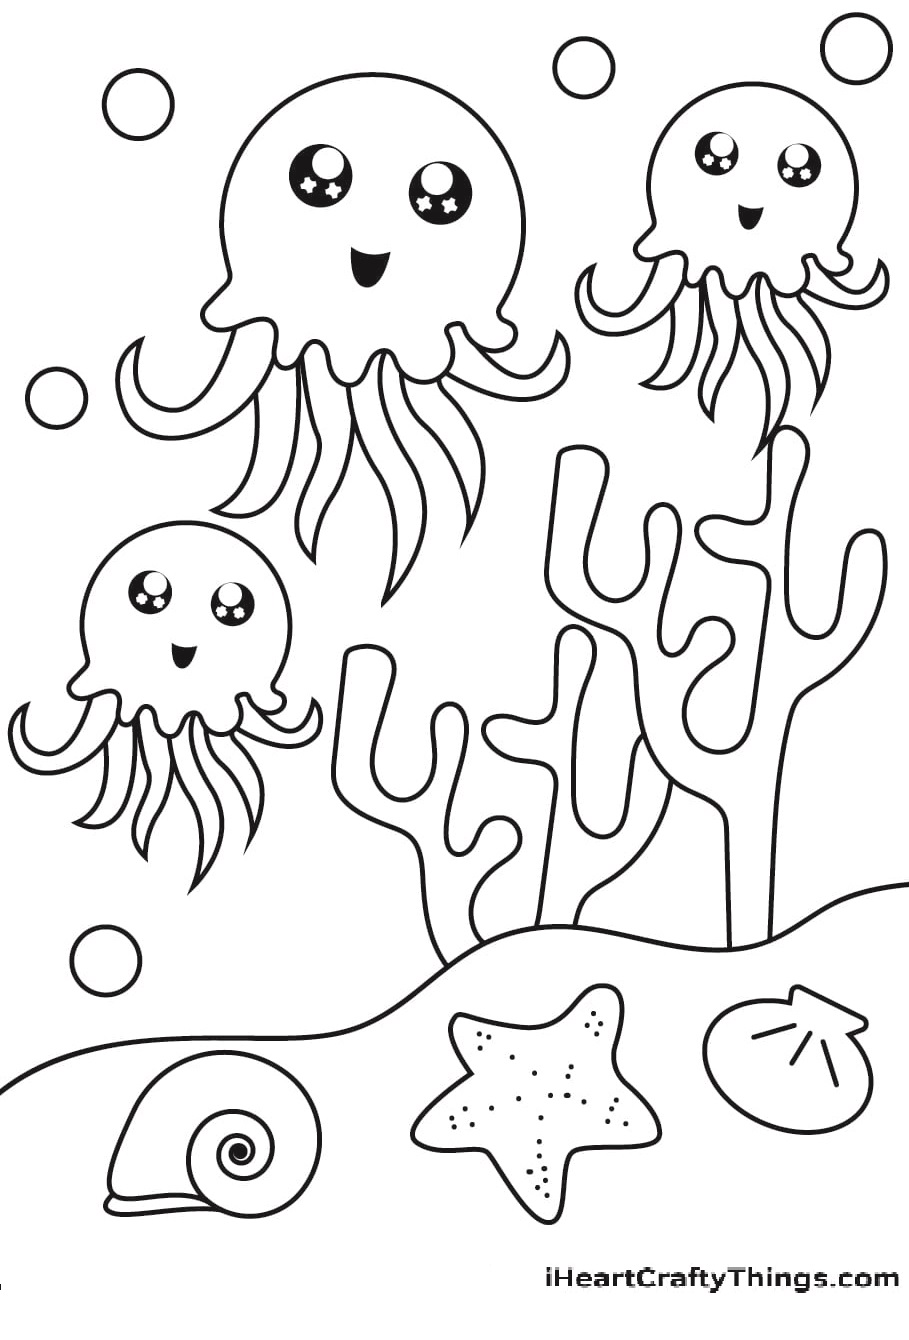 Cute Jellyfish Image Coloring Page